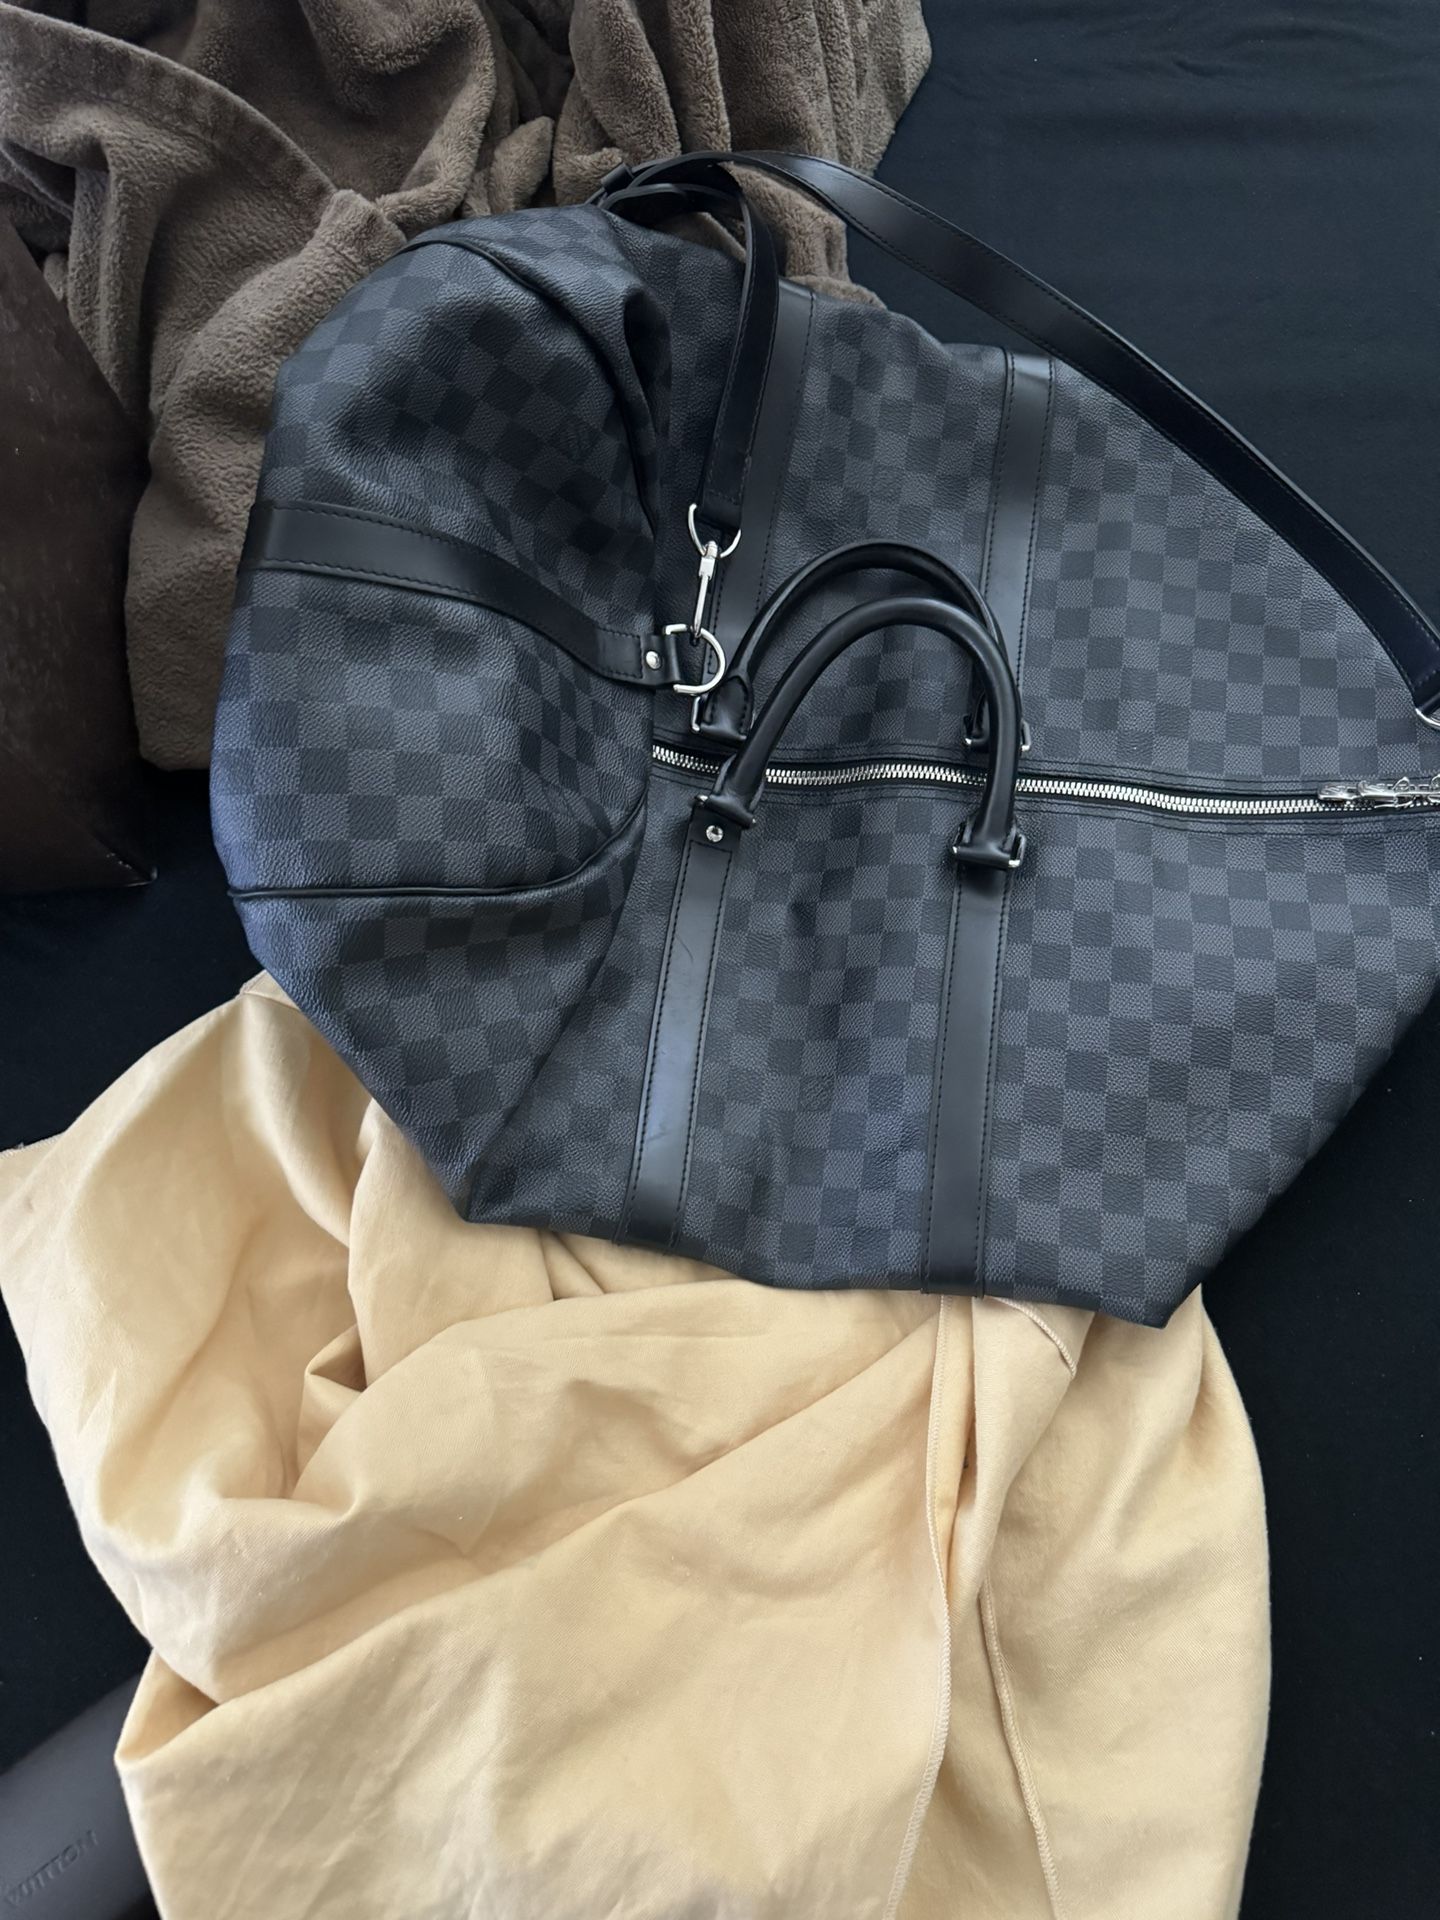 Louis Vuitton Keep all Duffle 55 - Authentic - Used Lightly - 1500$ 